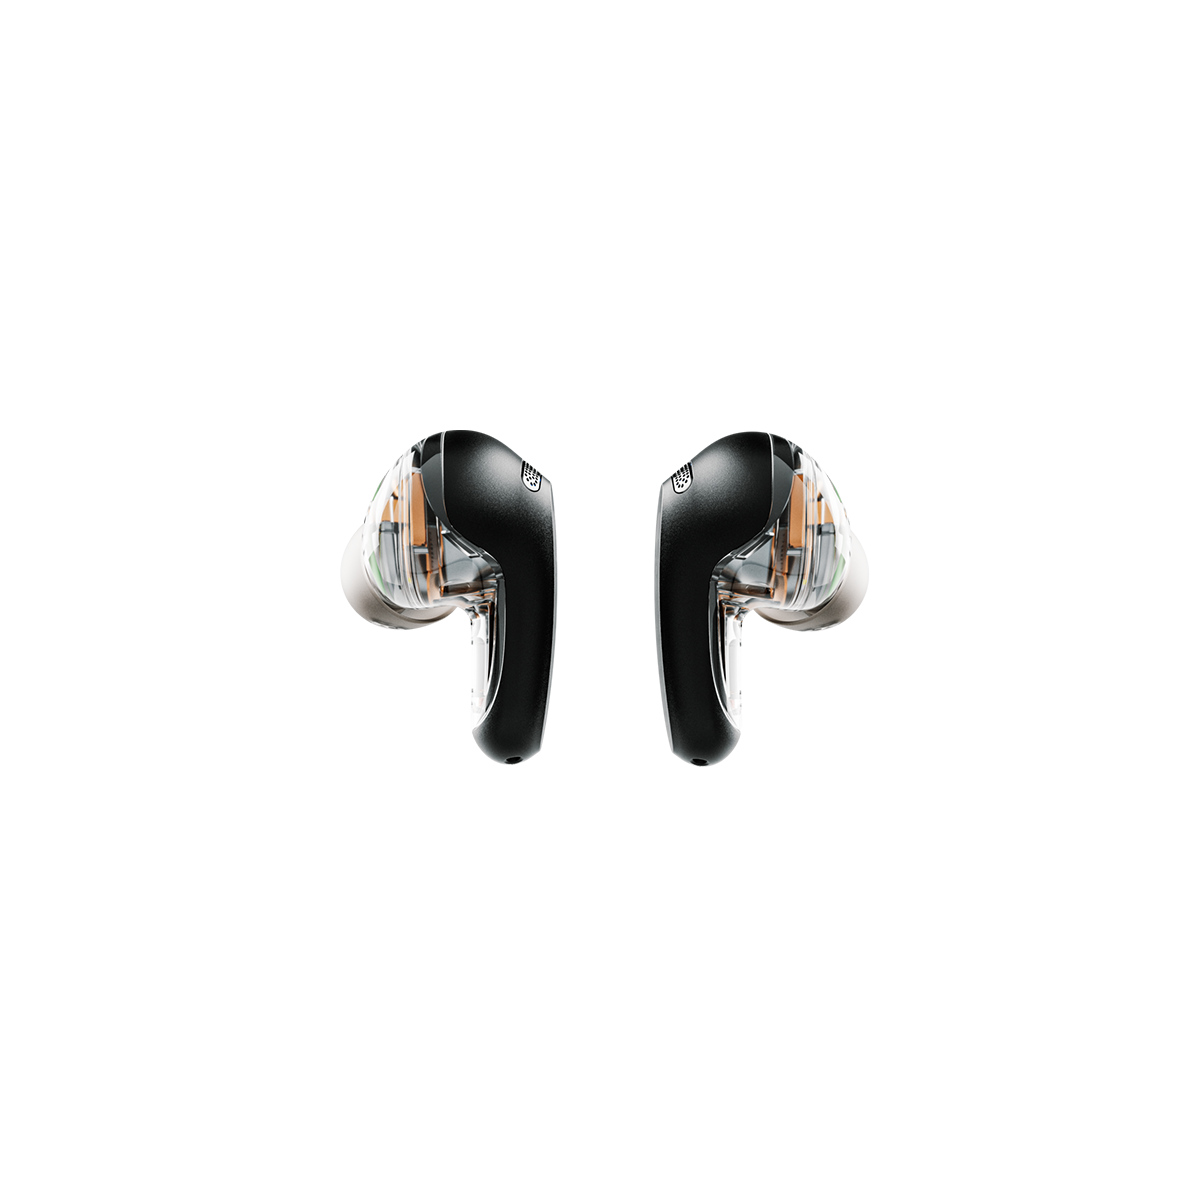 NEW! Rail ANC Earbuds